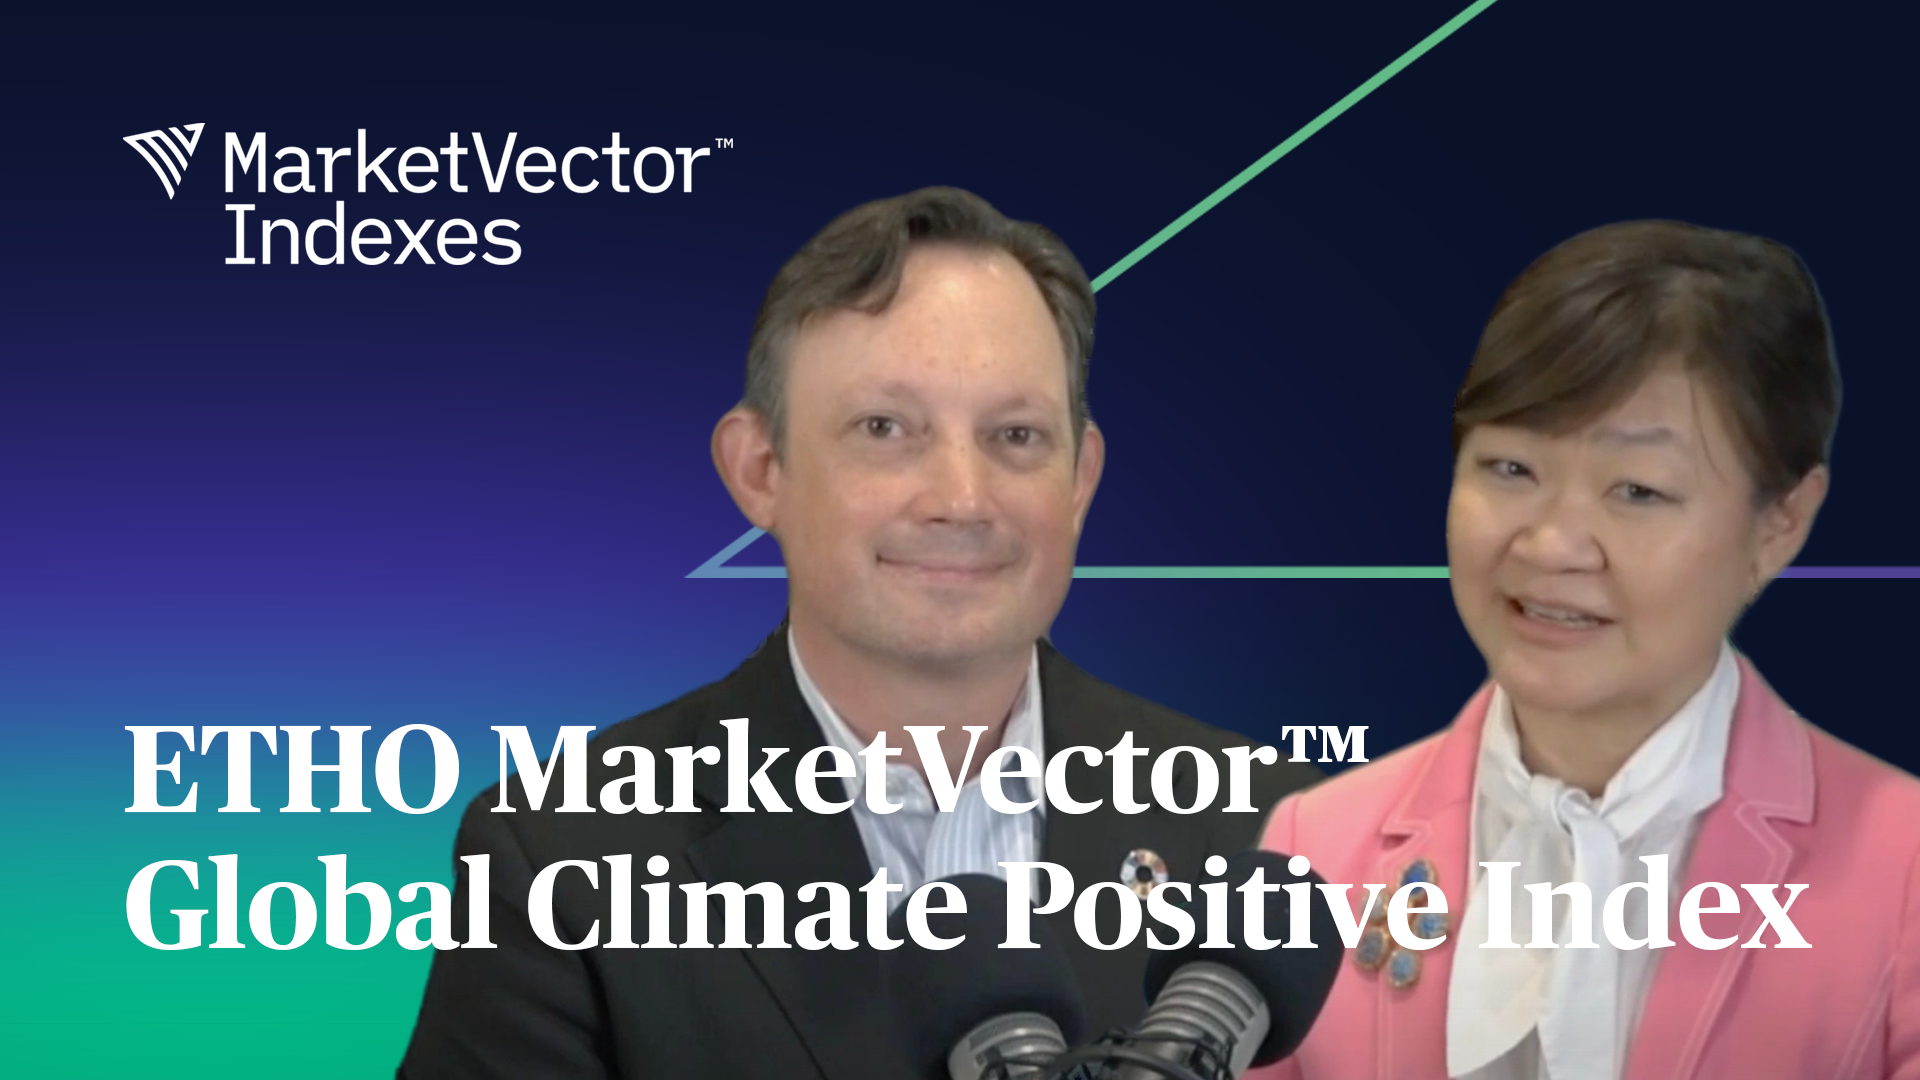 Indexing the Headlines: ETHO MarketVector™ Global Climate Positive Index